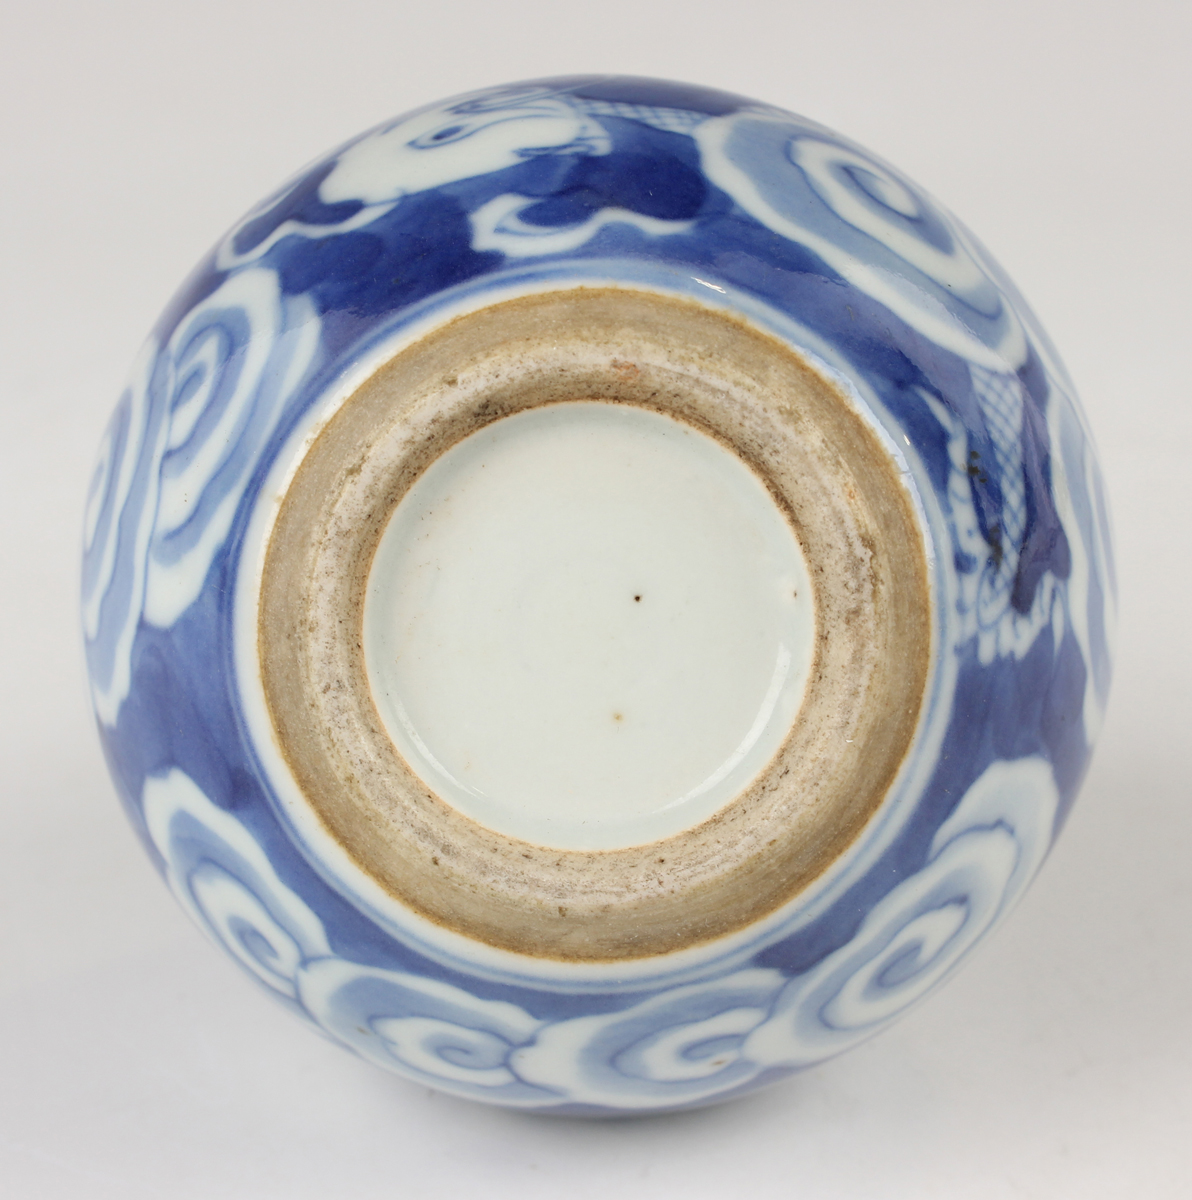 A Chinese blue and white porcelain bottle vase, Qing dynasty, painted with a dragon emerging through - Image 11 of 16